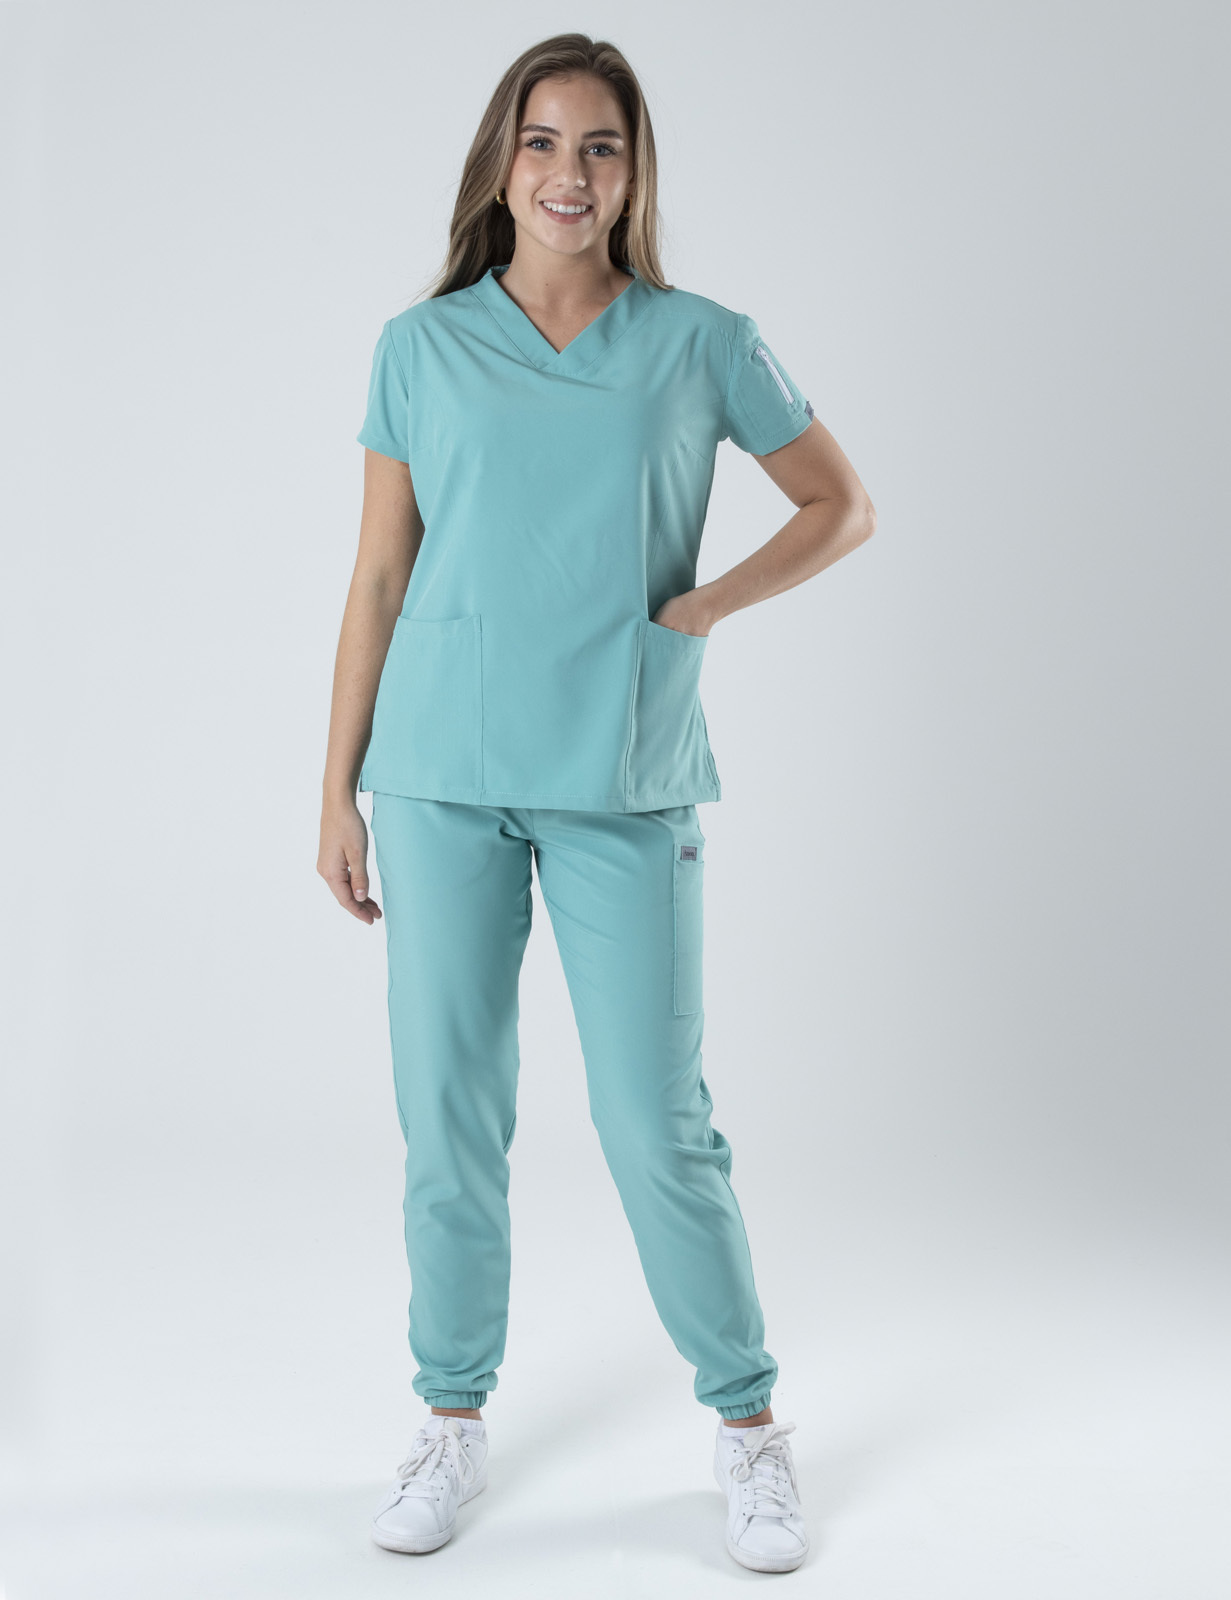 Anon Women's Scrub Top (Whisper Collection) Poly/Spandex - Cool Mint - XX Small - 1